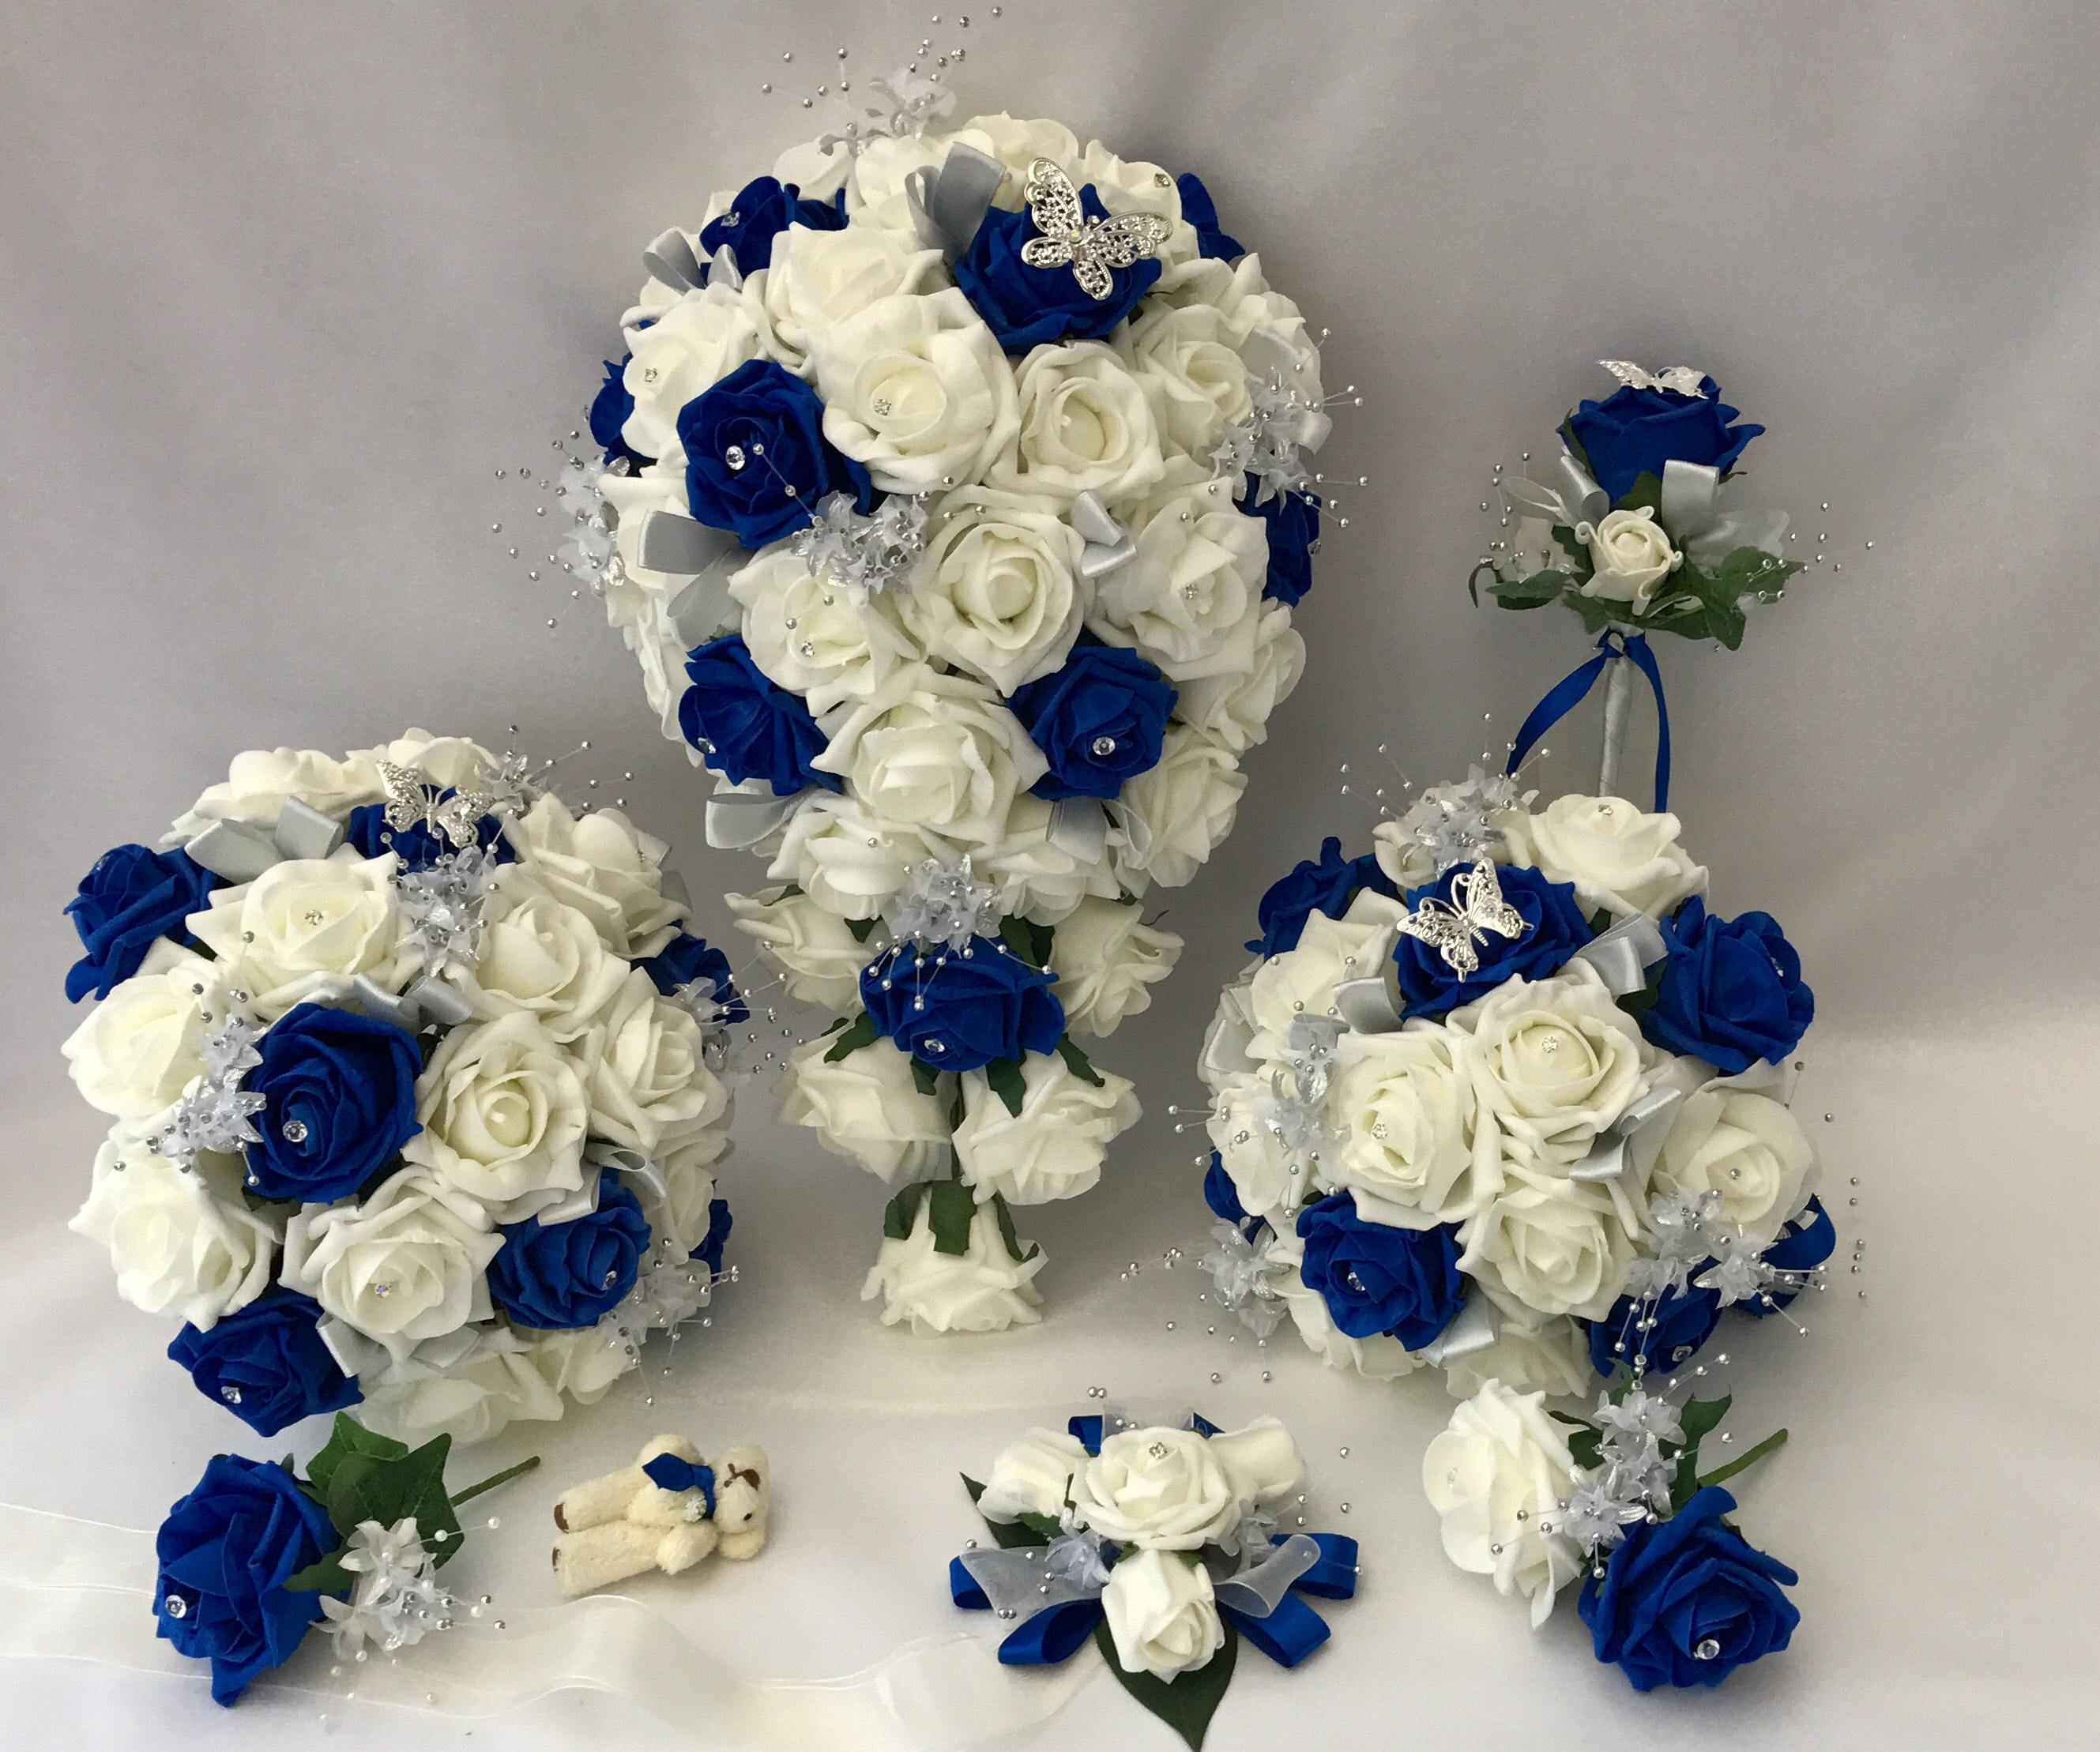 Artificial Flowers Wedding Ivory,Royal Blue Cake Topper,Thistles,Hand-Crafted, 